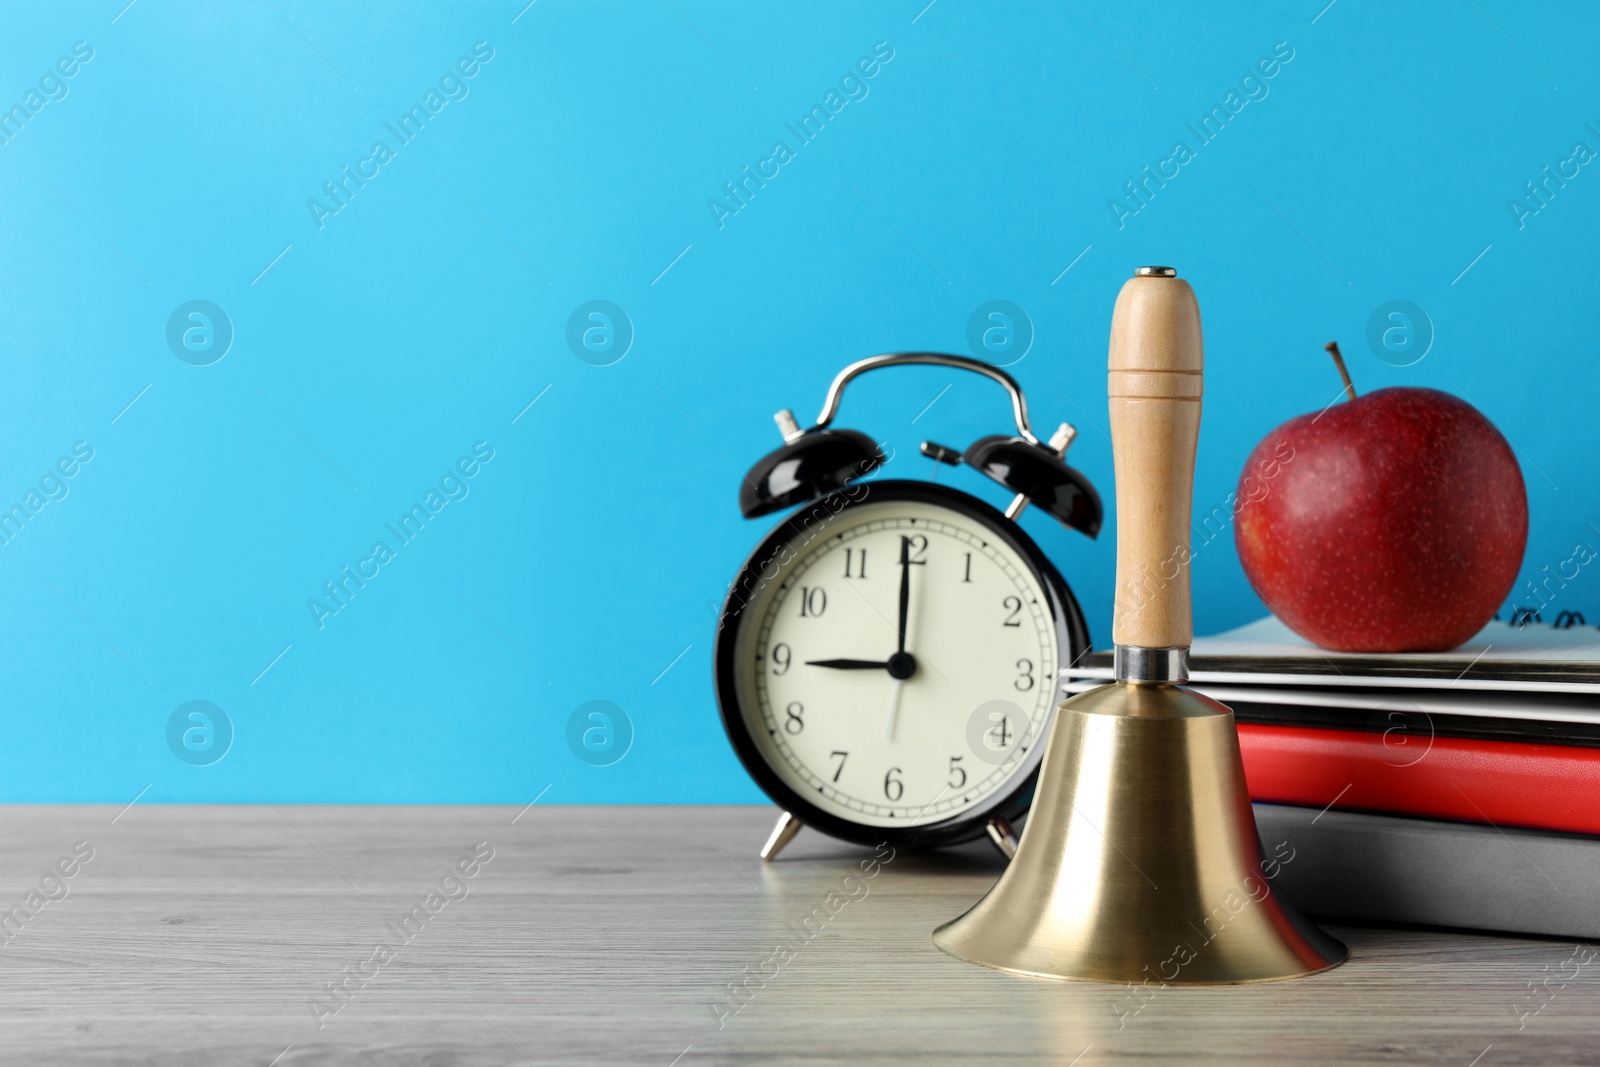 Photo of Golden school bell, apple, alarm clock and books on wooden table against turquoise background, space for text